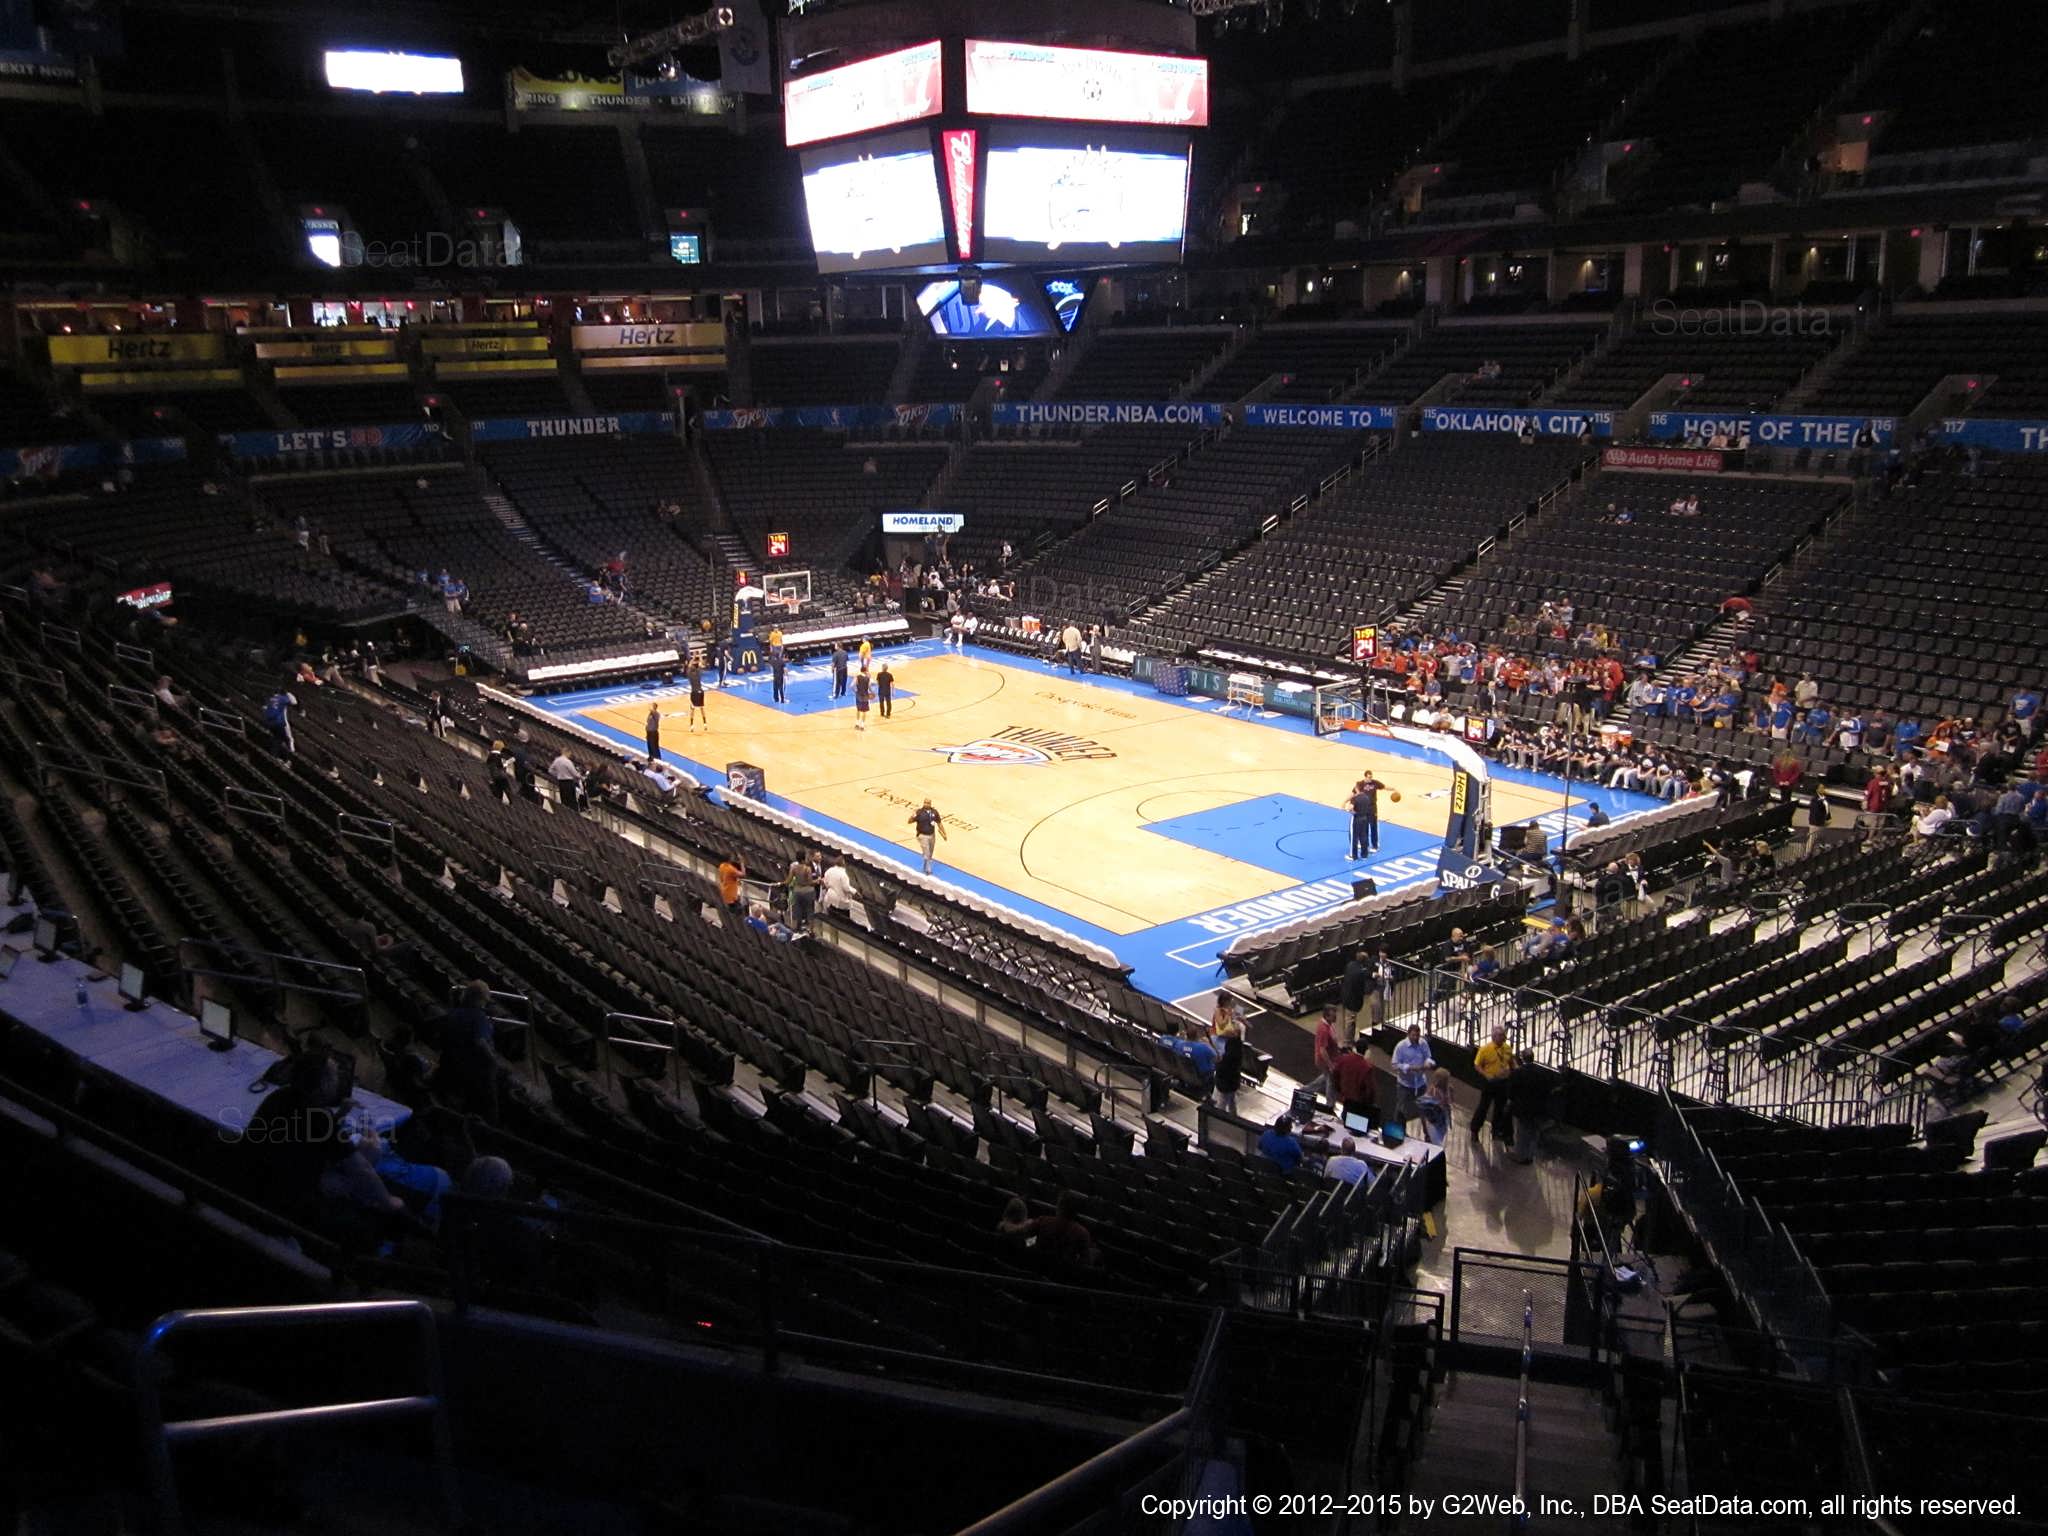 Seat view from section 204 at Chesapeake Energy Arena, home of the Oklahoma City Thunder